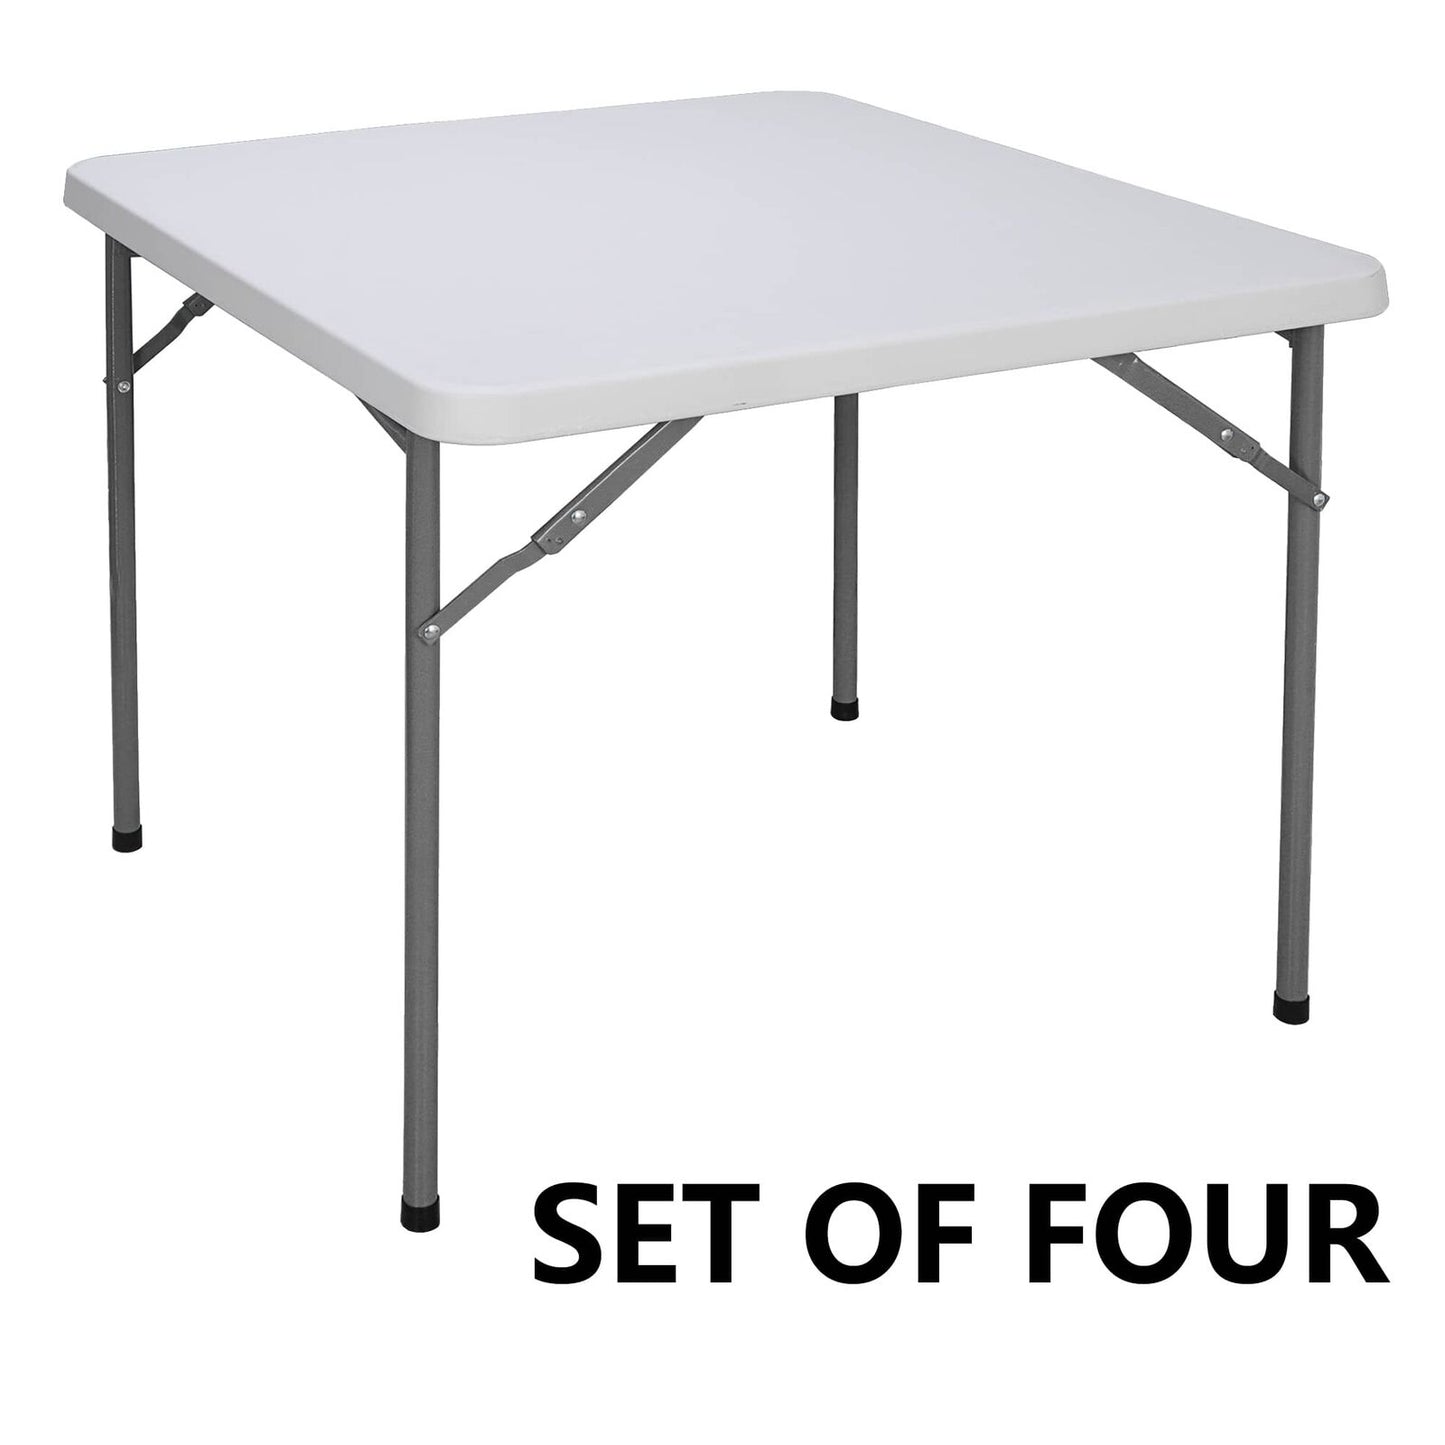 4PCS 3ft Folding Table Portable Indoor Outdoor Picnic Party Camping Tables